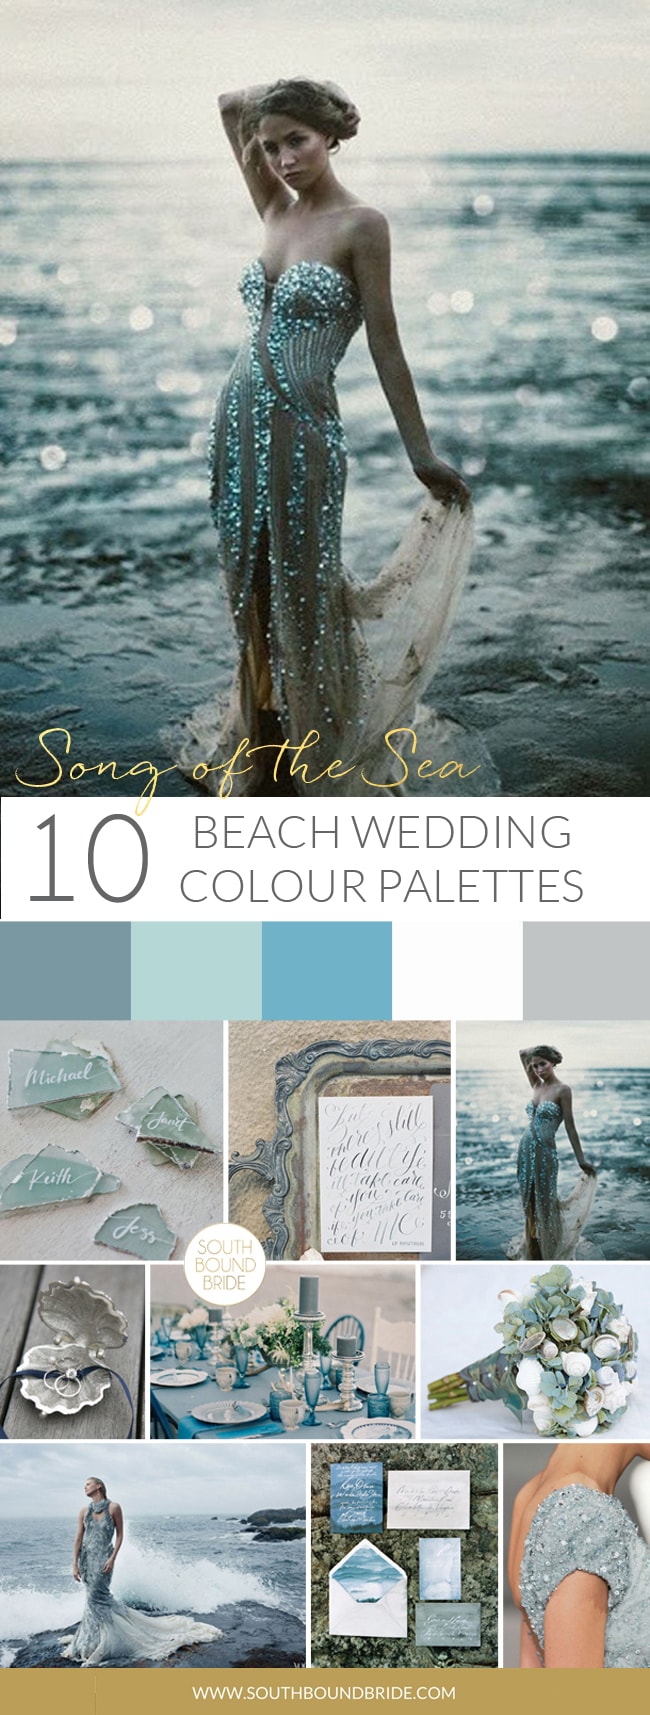 Song of the Sea Beach Wedding Palette | SouthBound Bride